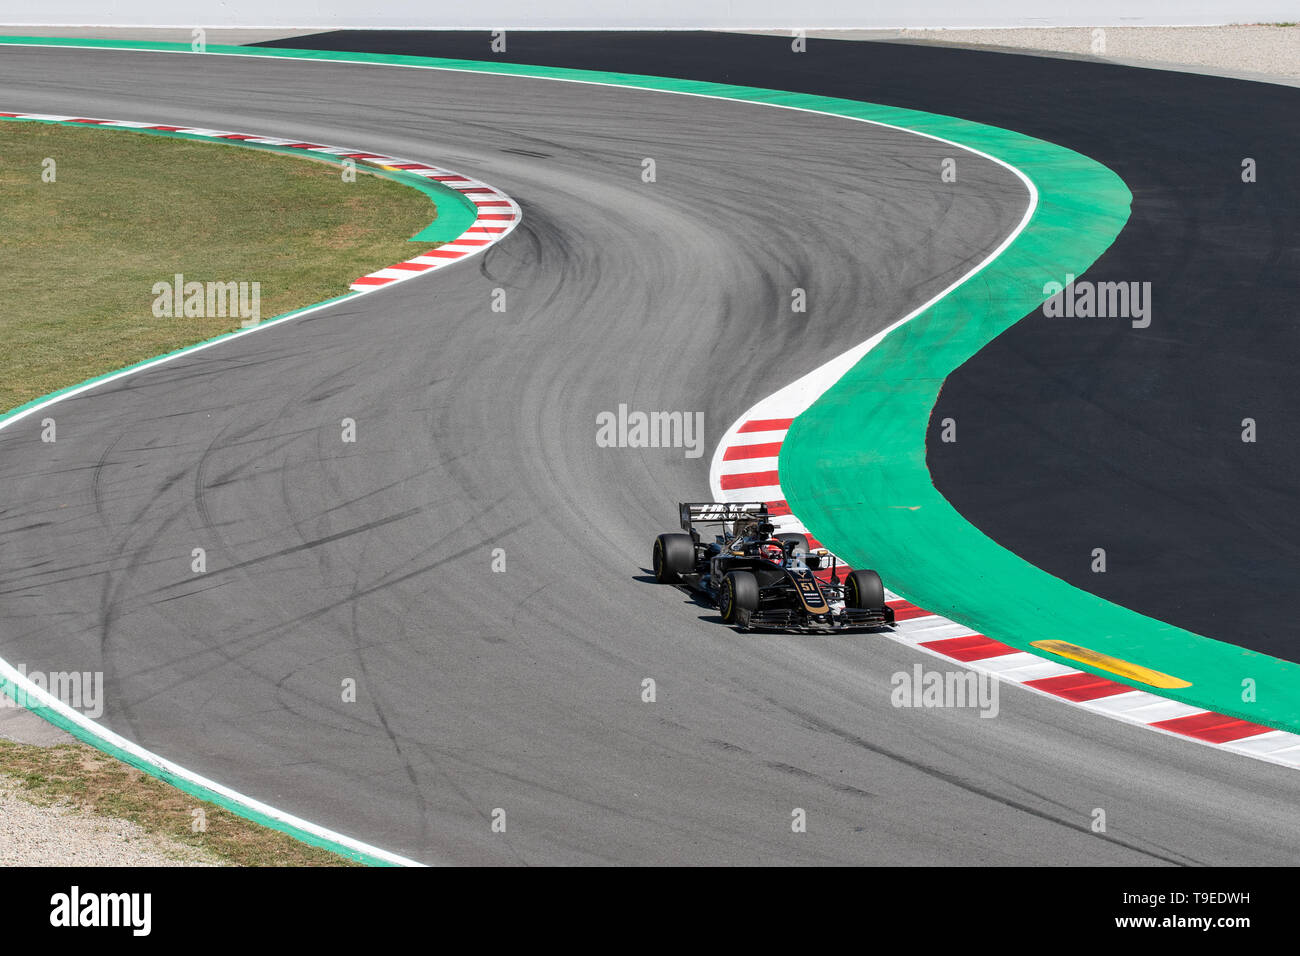 Barcelona, Spain. May, 14th, 2019. Pietro Fittipaldi of Brasil with 51 Haas F1 Team on track at F1 Test. Stock Photo